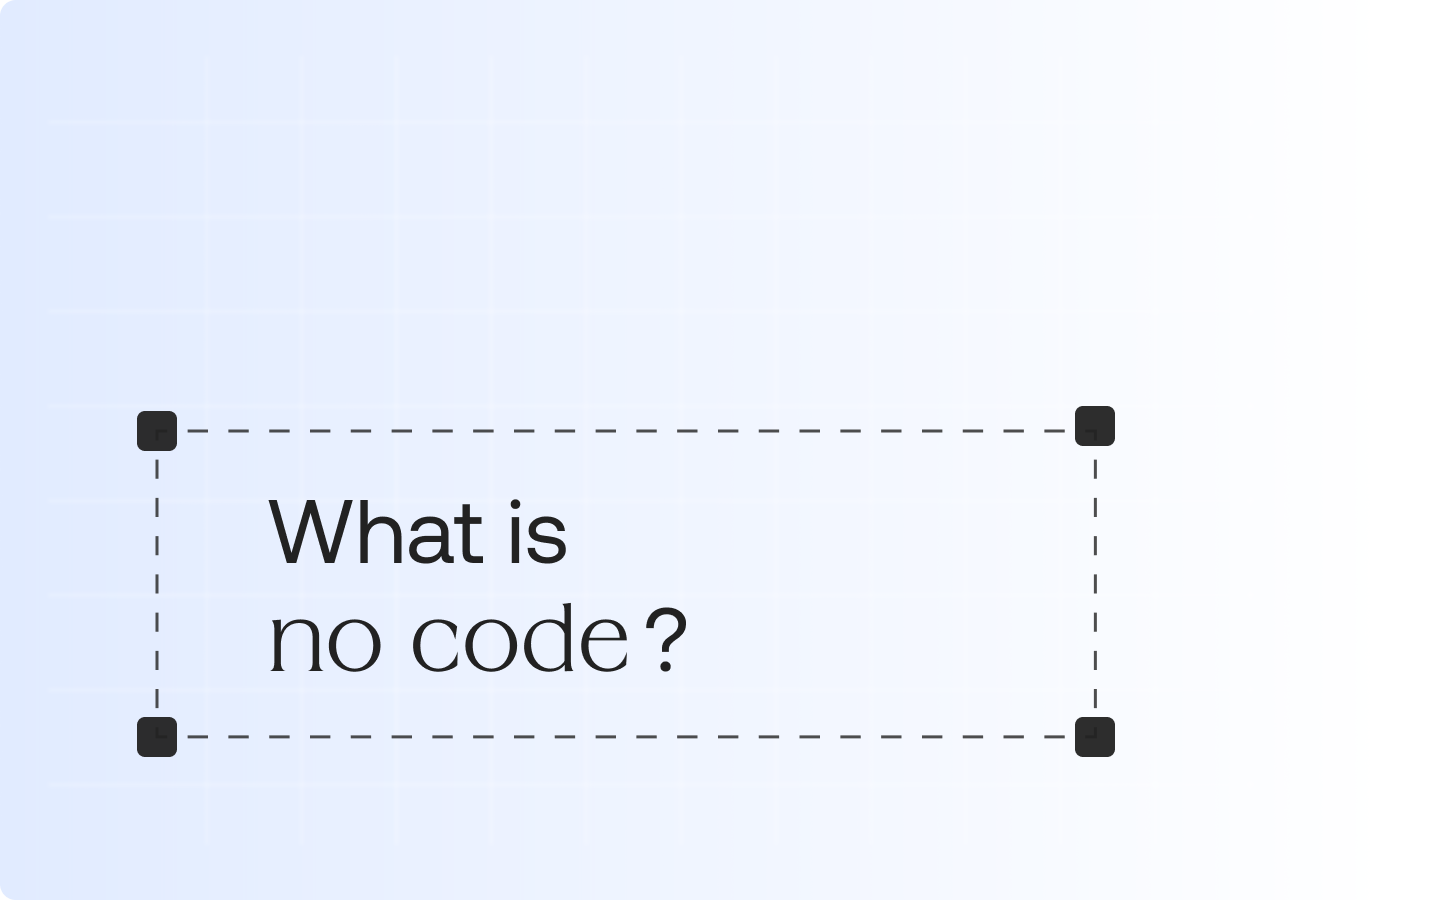 What is no code